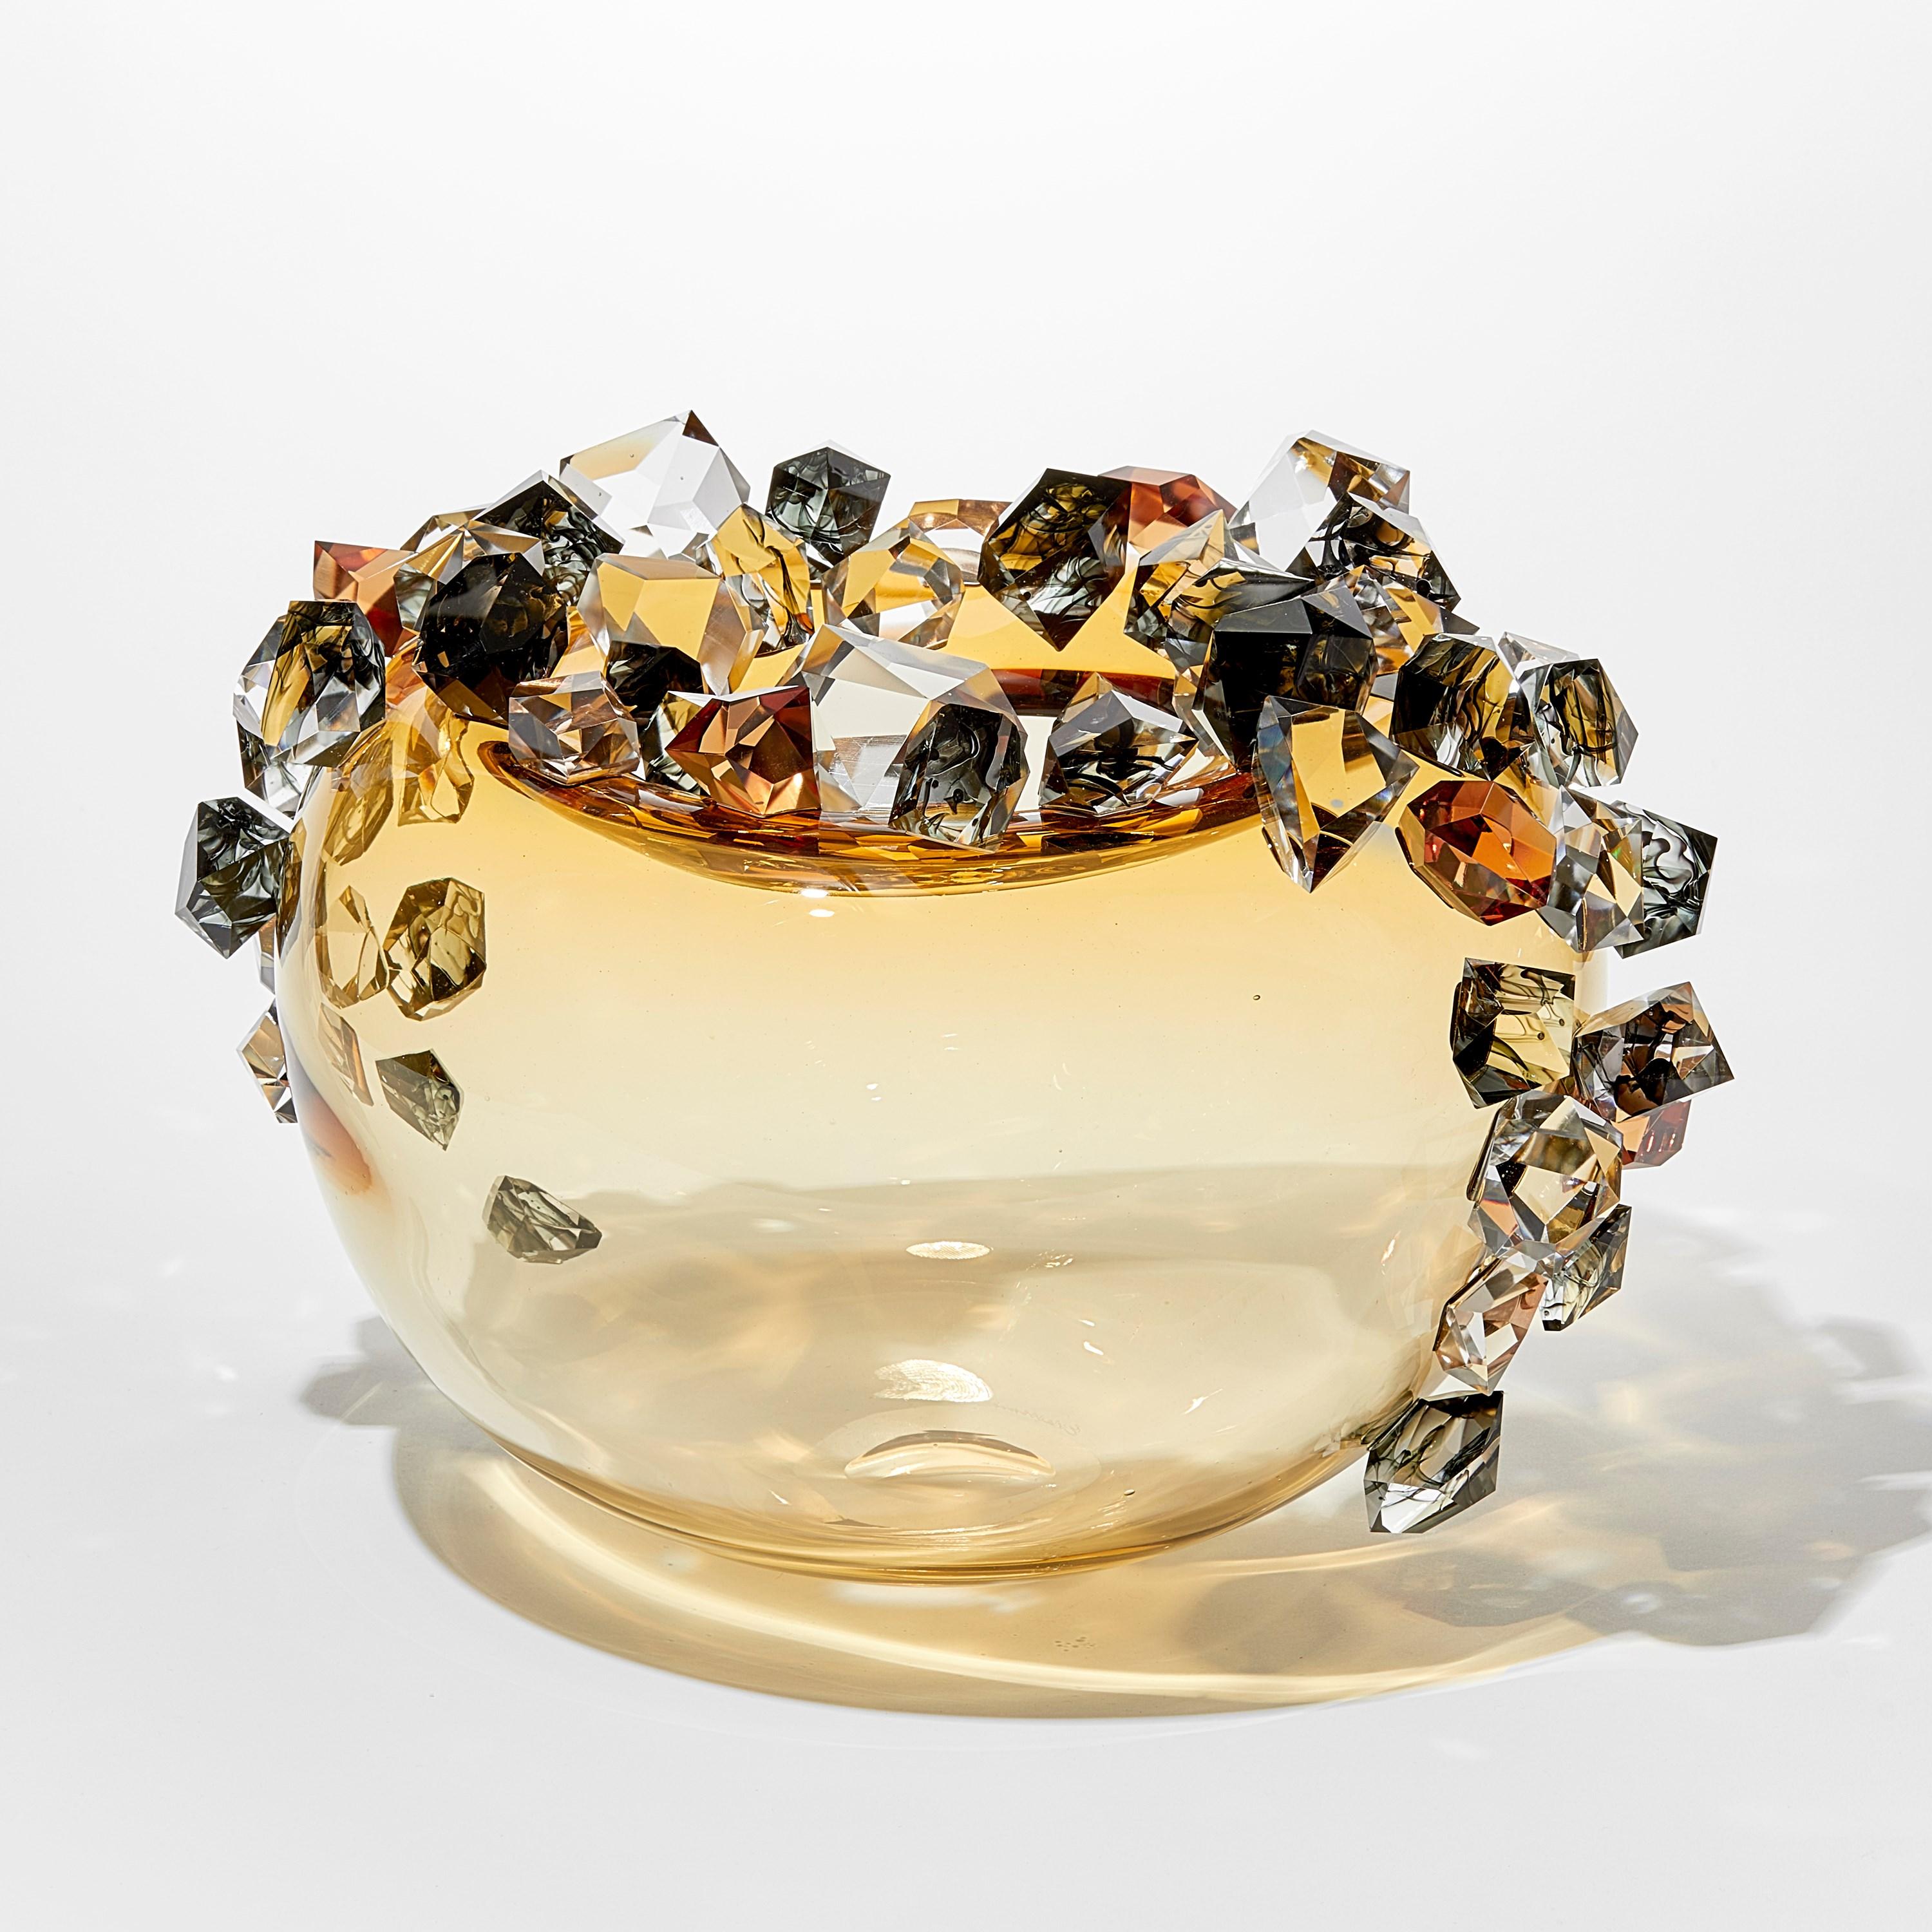 Organic Modern Cristal Diffusion in Amber, crystal adorned glass sculpture by Hanne Enemark For Sale